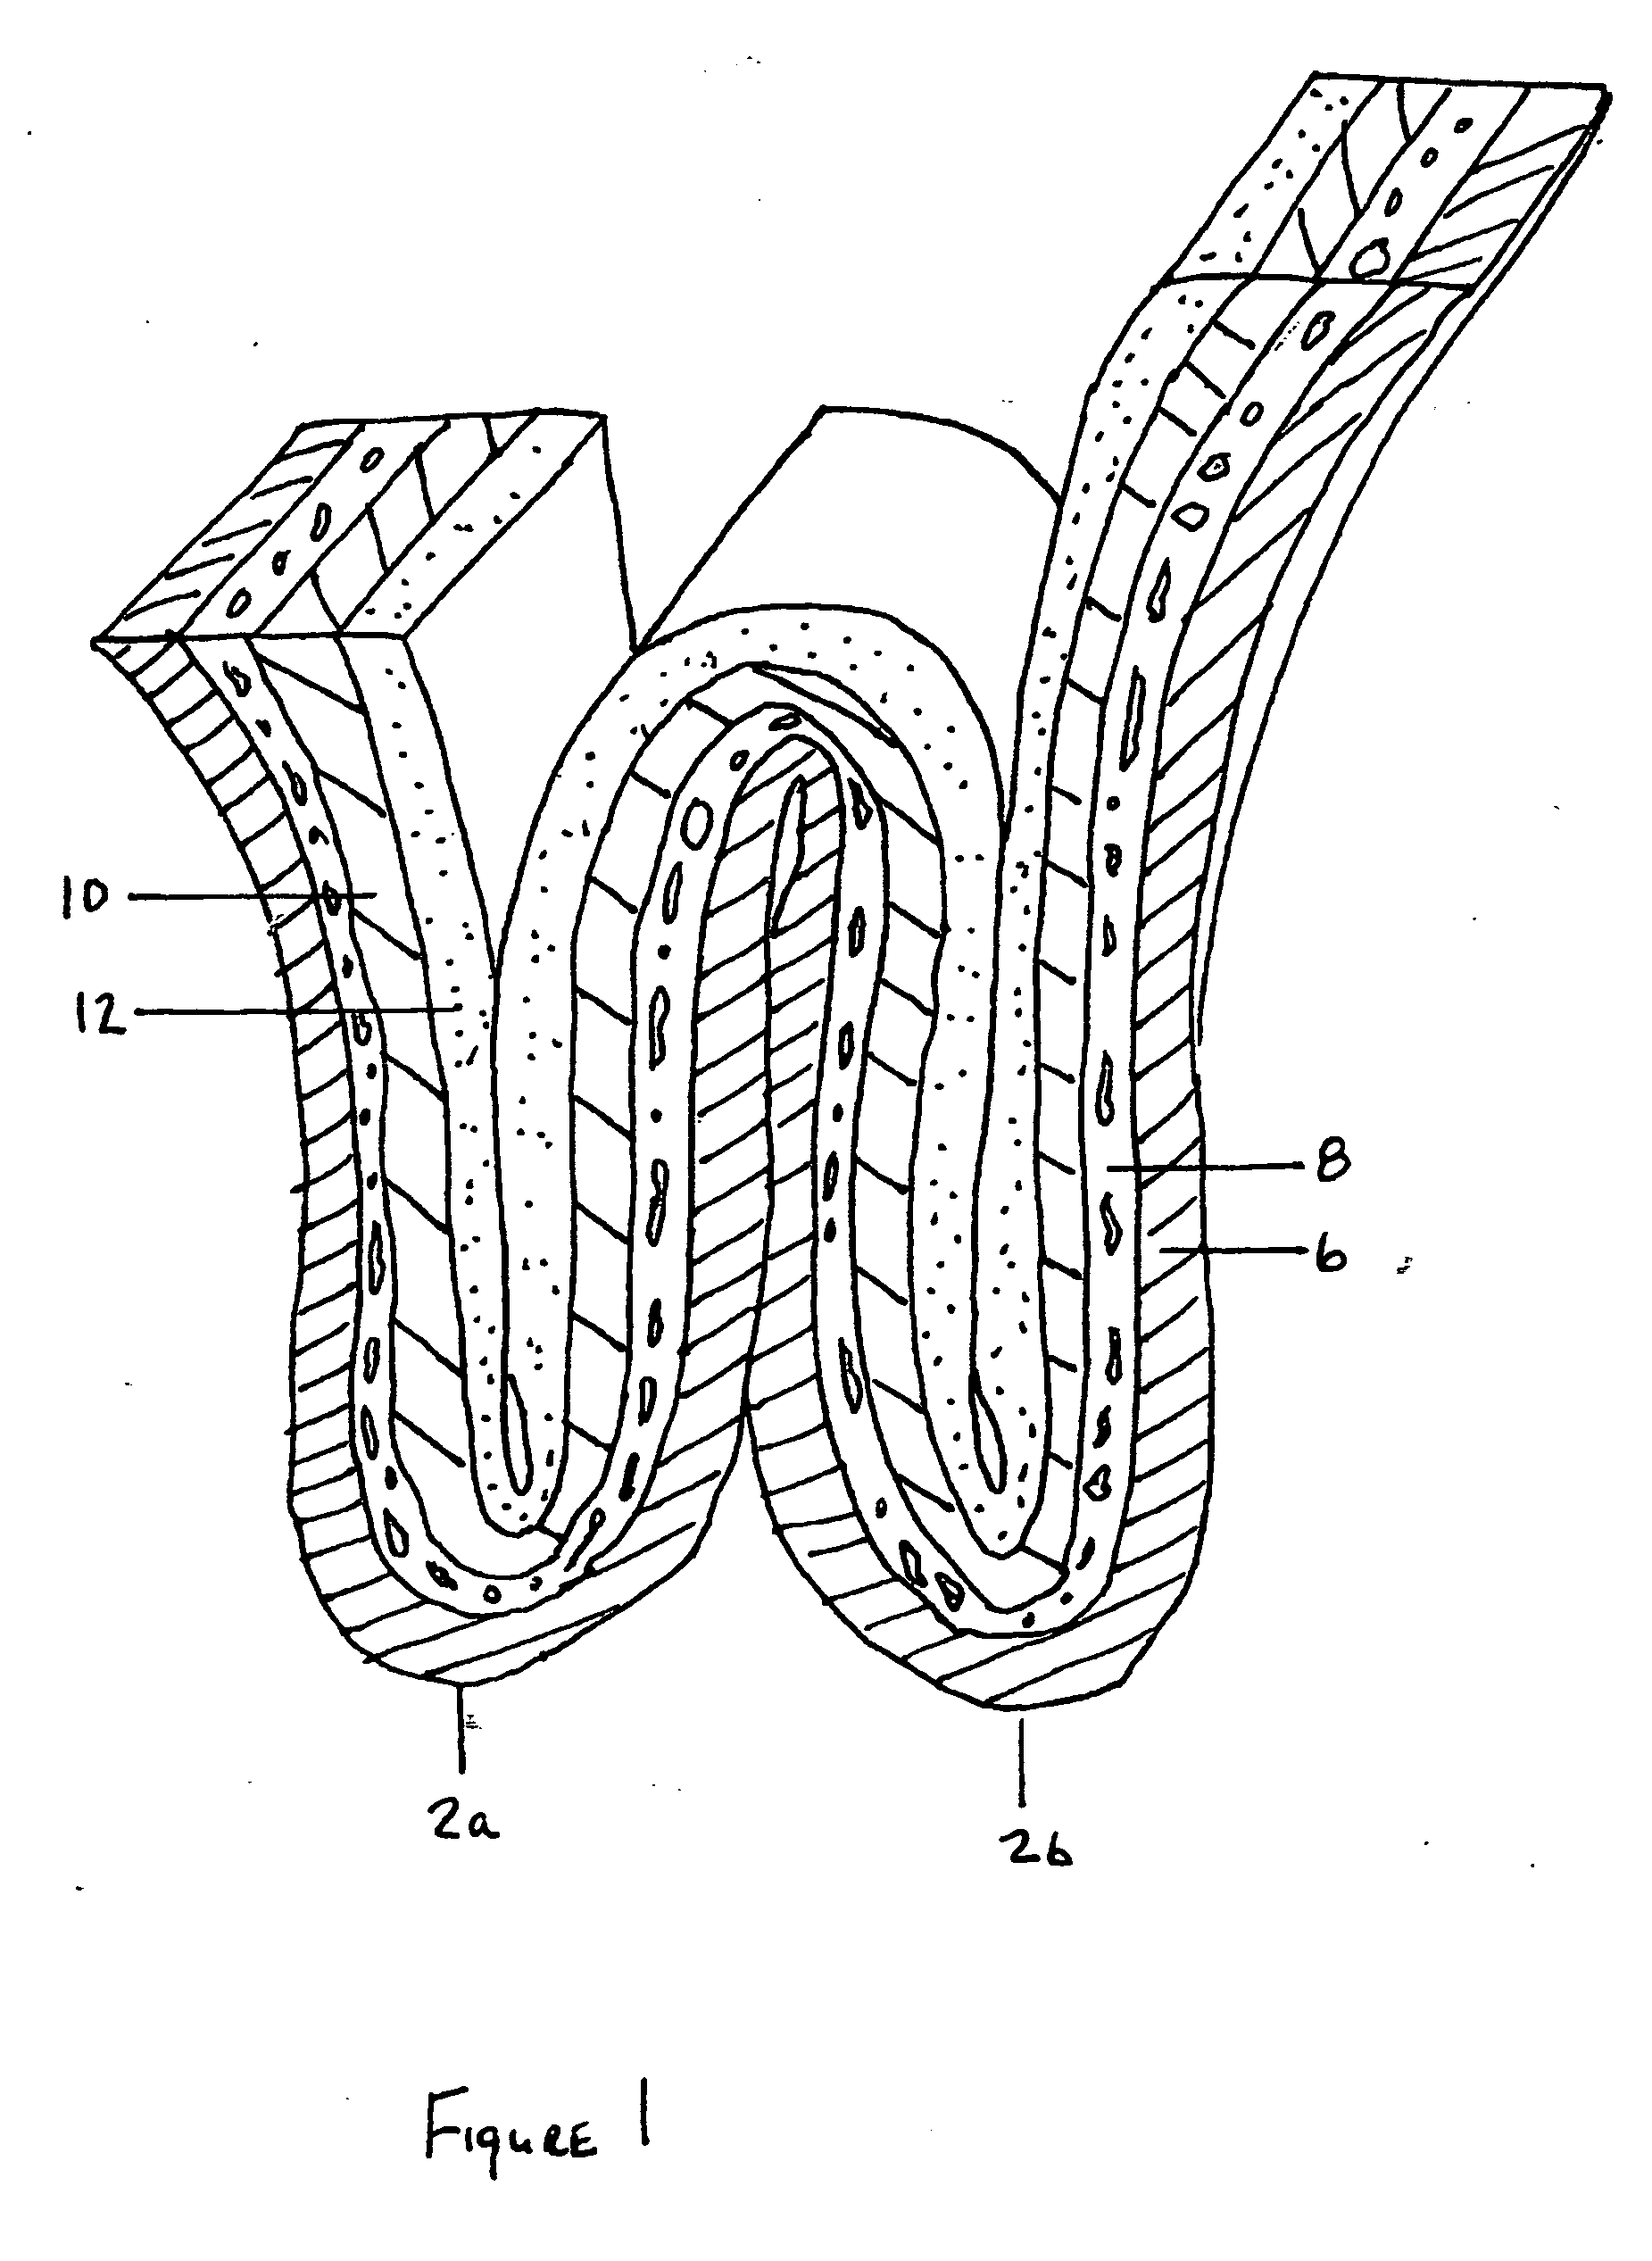 Methods and apparatus for excising tissue and creating wall-to-wall adhesions from within an organ